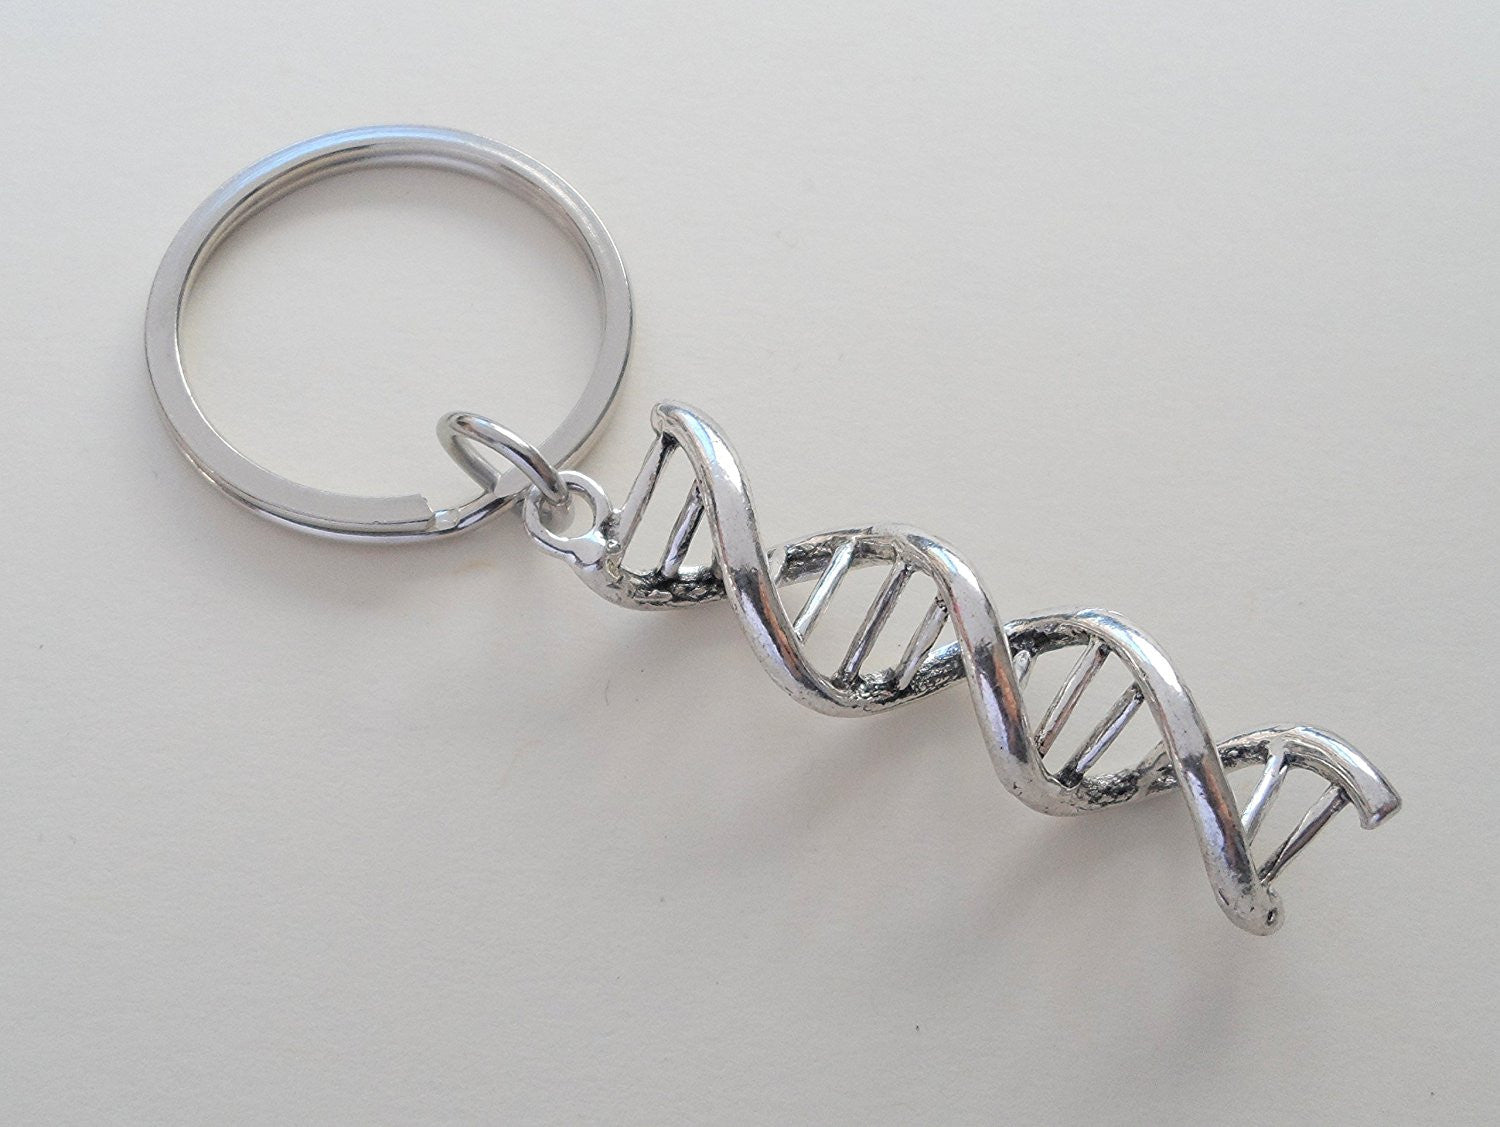  Pinstant DNA Double Helix Gene Genetic Genome Chromosome  Science Cells Chemistry Biochemistry 17.7 Neck Lanyard Keychain Holder ID  Badge Mobile Phone Pin Strap : Office Products